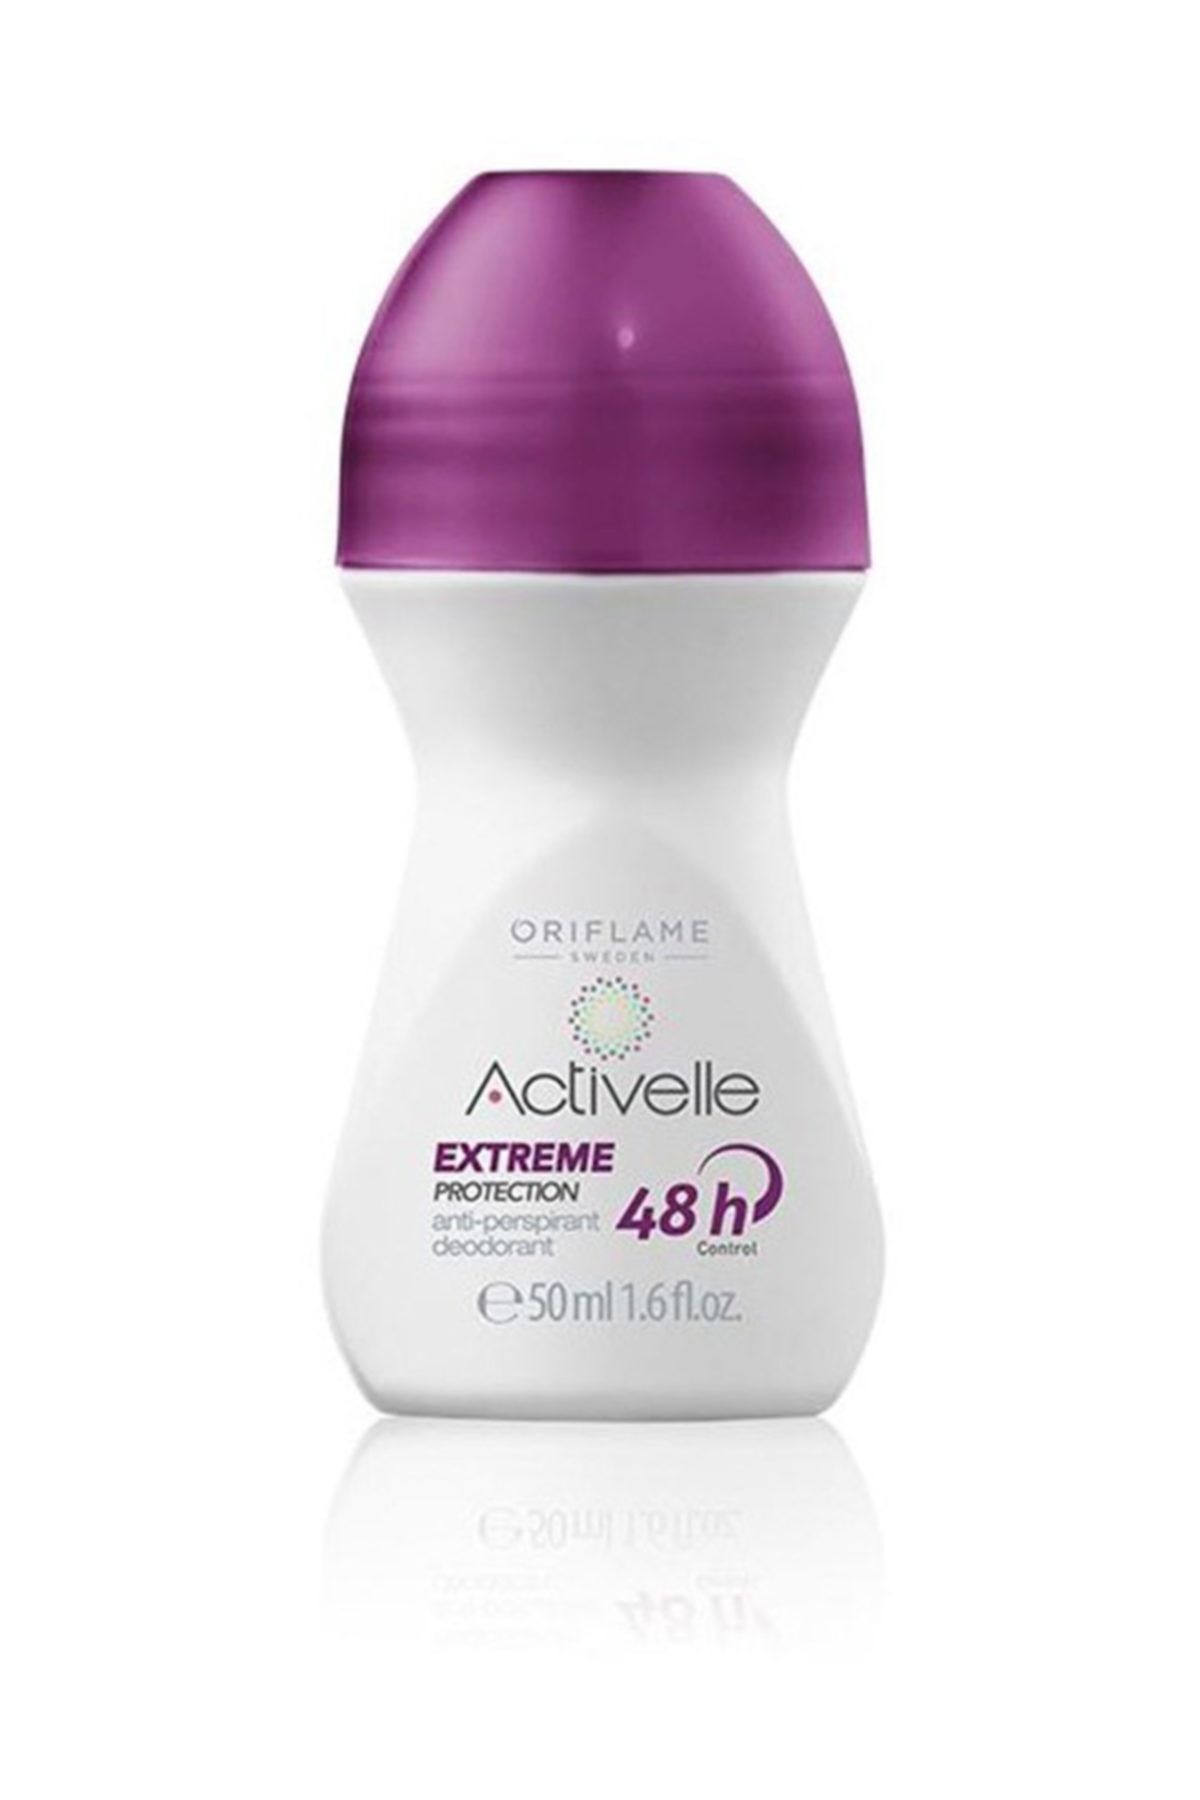 Oriflame Activelle Roll-on Deodorant